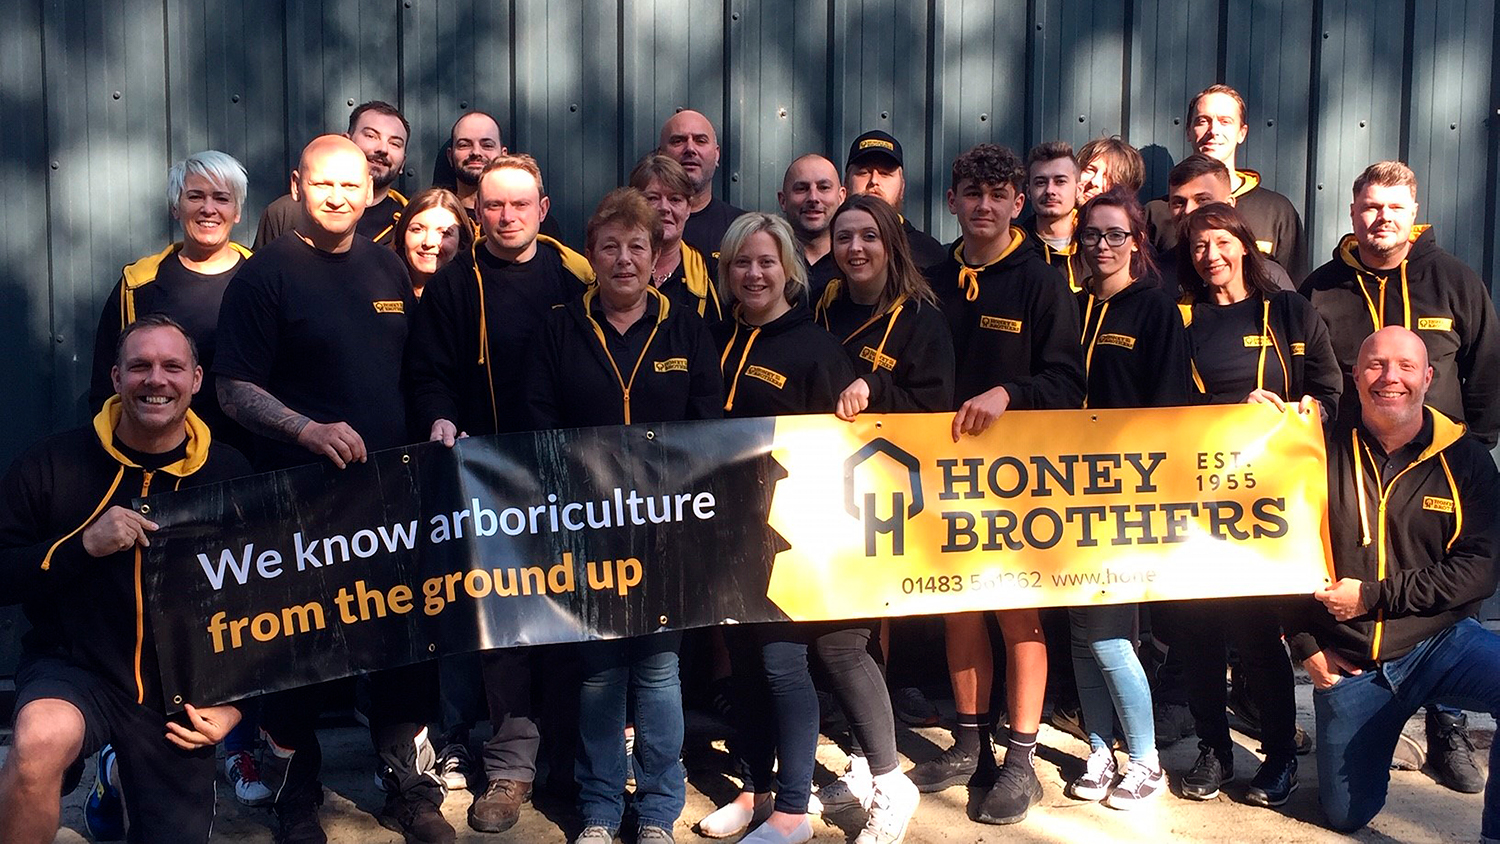 Honey Brothers staff proudly show off new branding